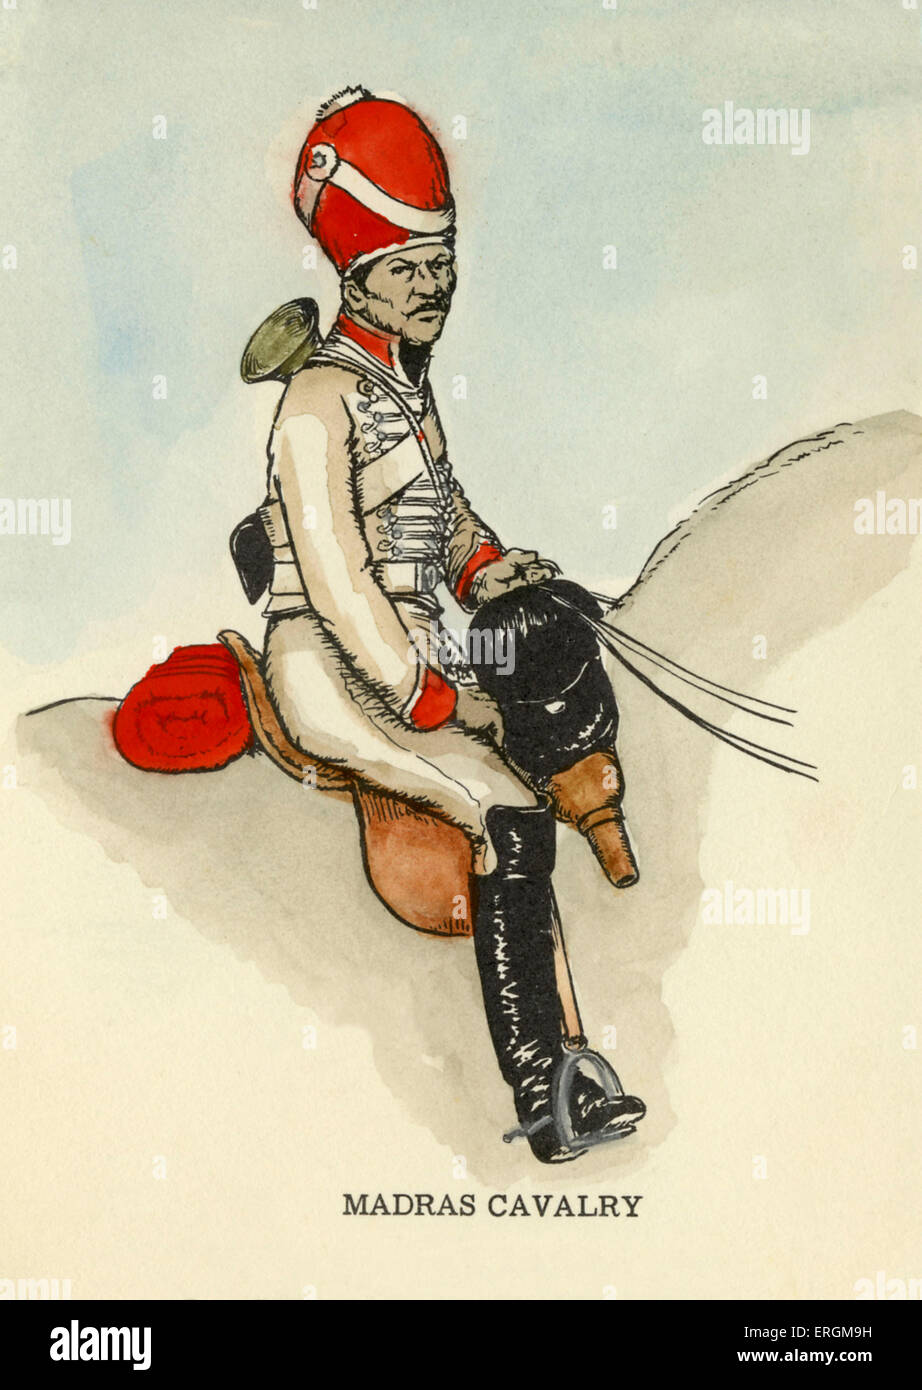 Madras Cavalry unit, British Army. Illustration after a Rend North illustration, 1962. Caption reads: 'Headdress: red; Breeches, Belts, Jacket: white; Trumpet: brass'. Stock Photo